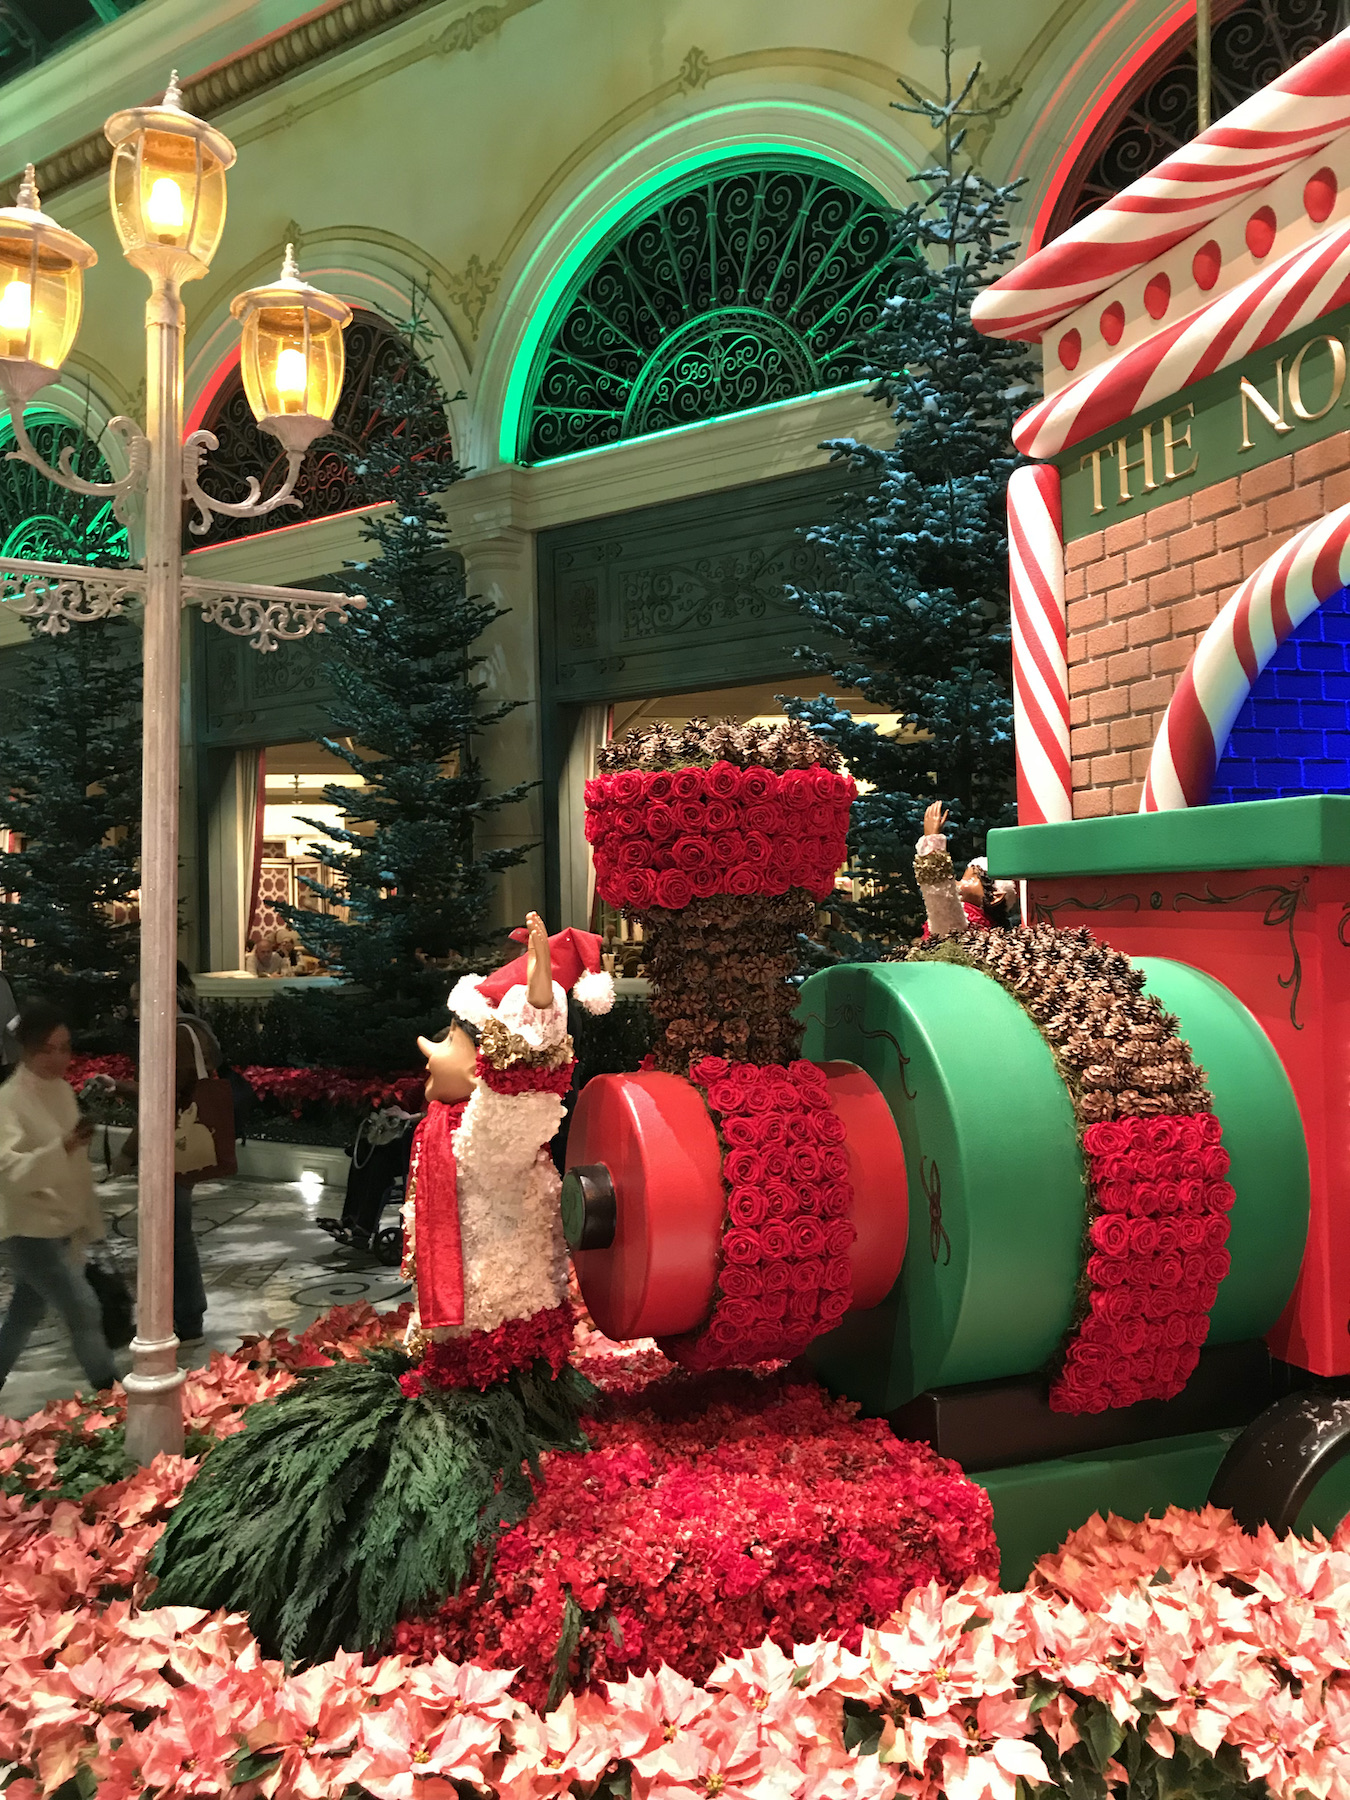 Flower Train at The Bellagio Conservatory